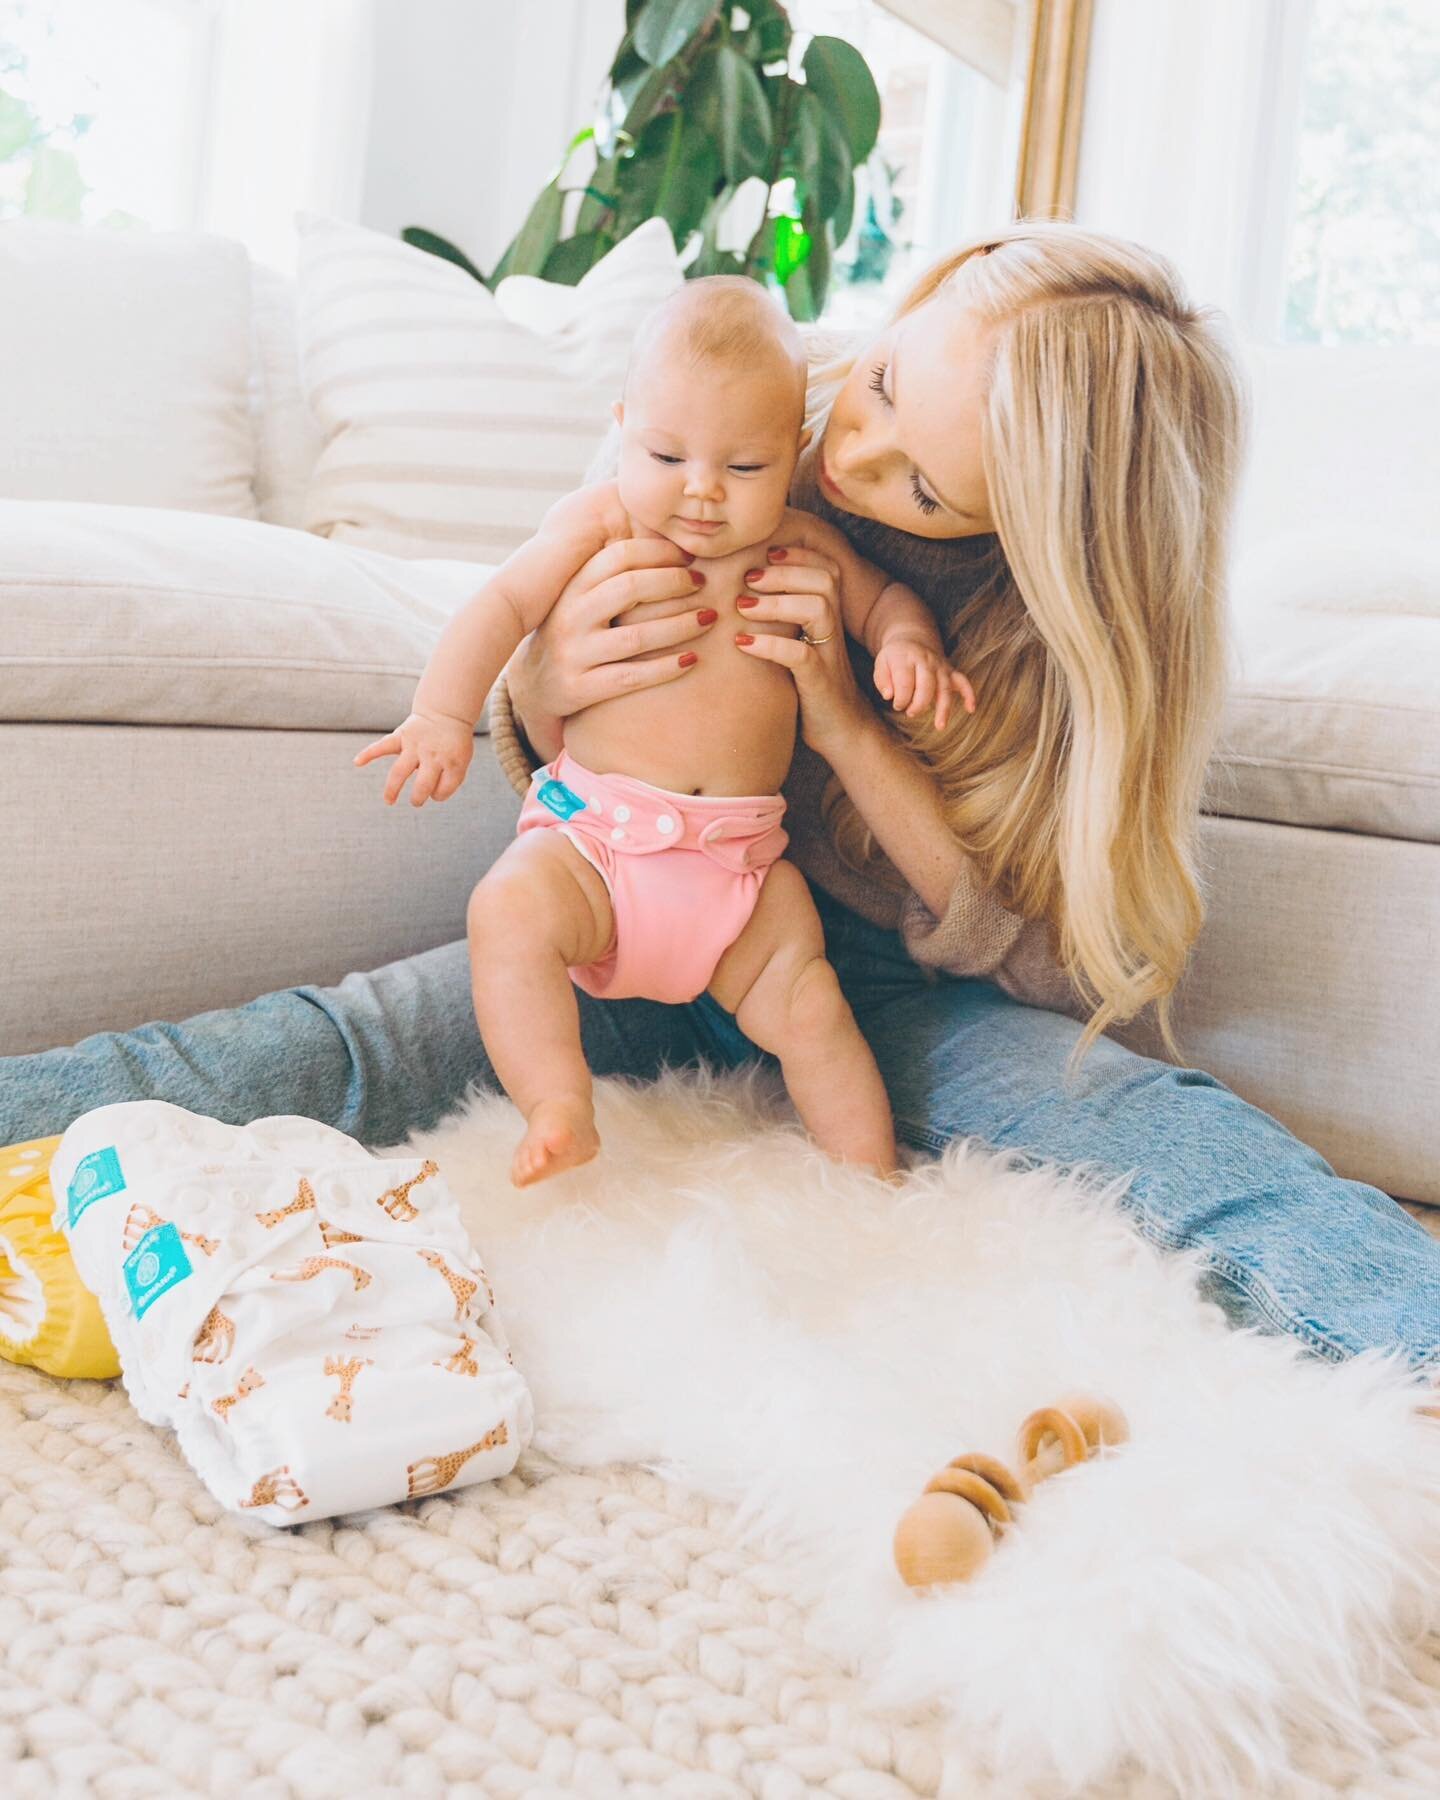 I&rsquo;ve been wanting to try reusable diapers for a while now and I&rsquo;m excited to start this journey using @lovecharliebanana cloth diapers! ✨Charlie Banana believes my baby can be a #TinyWorldChanger, making a huge difference in the world tod